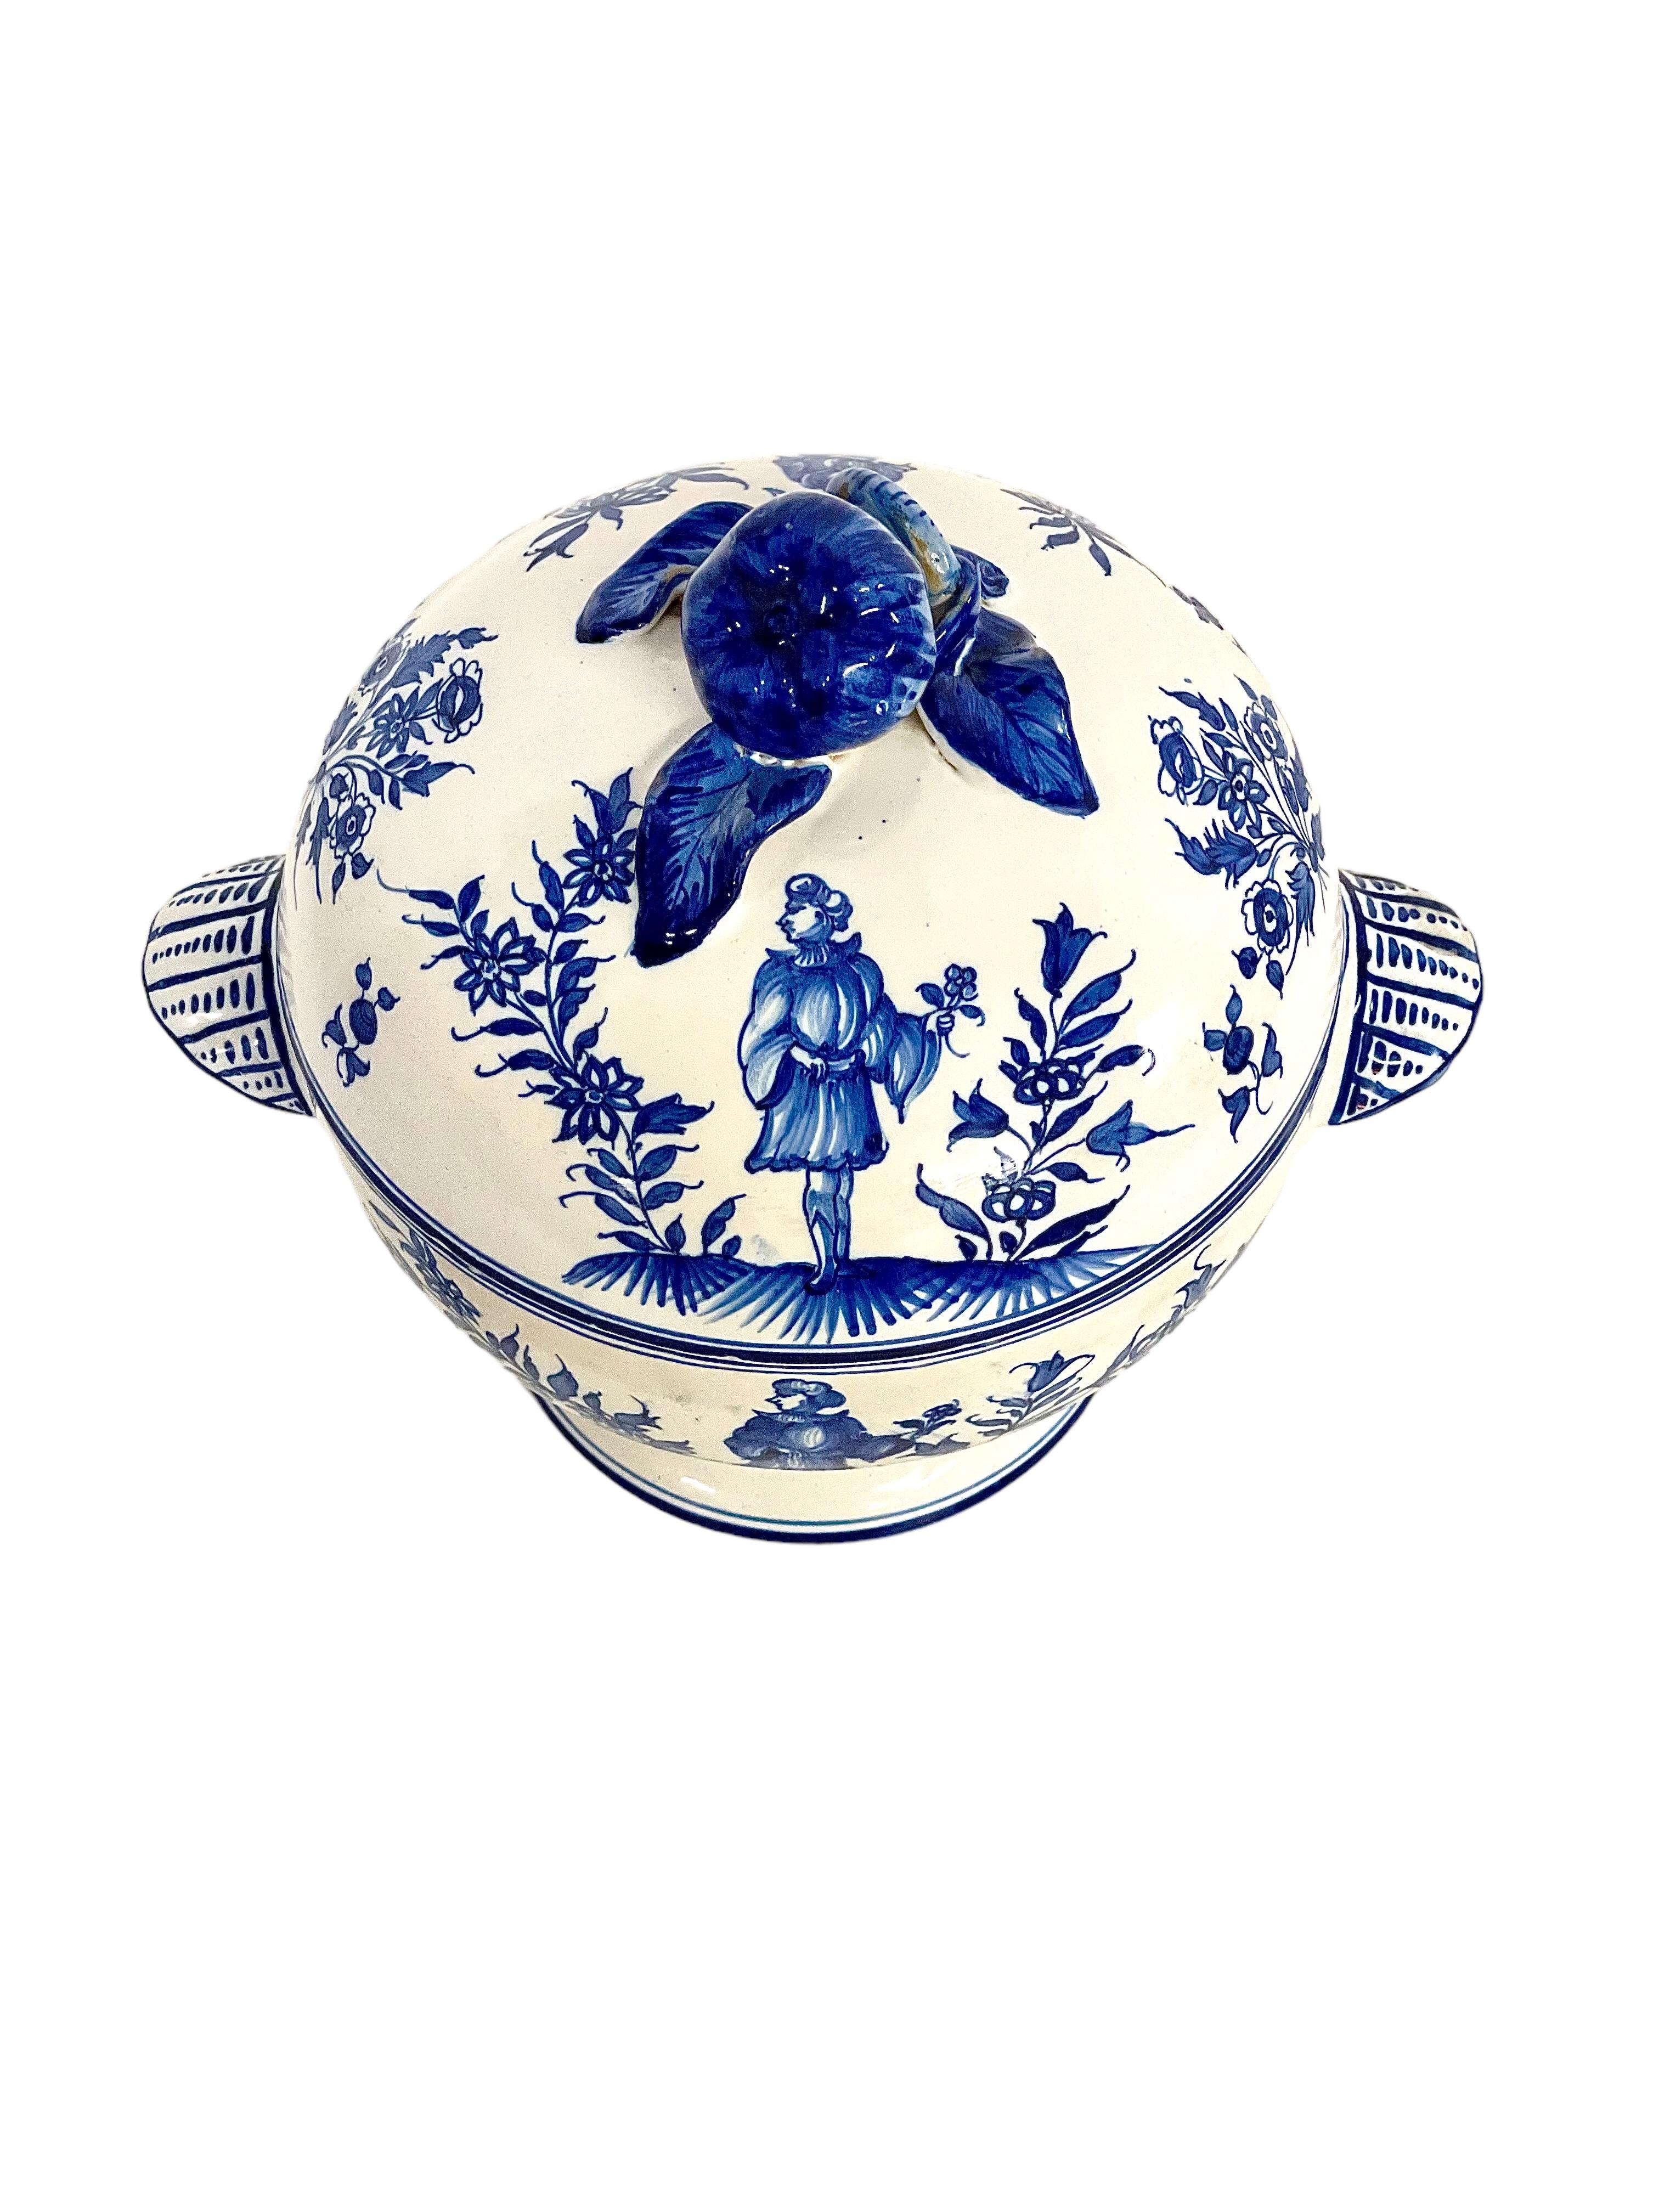 Blue and White Earthenware Lidded Tureen with Fantastical Decoration For Sale 2